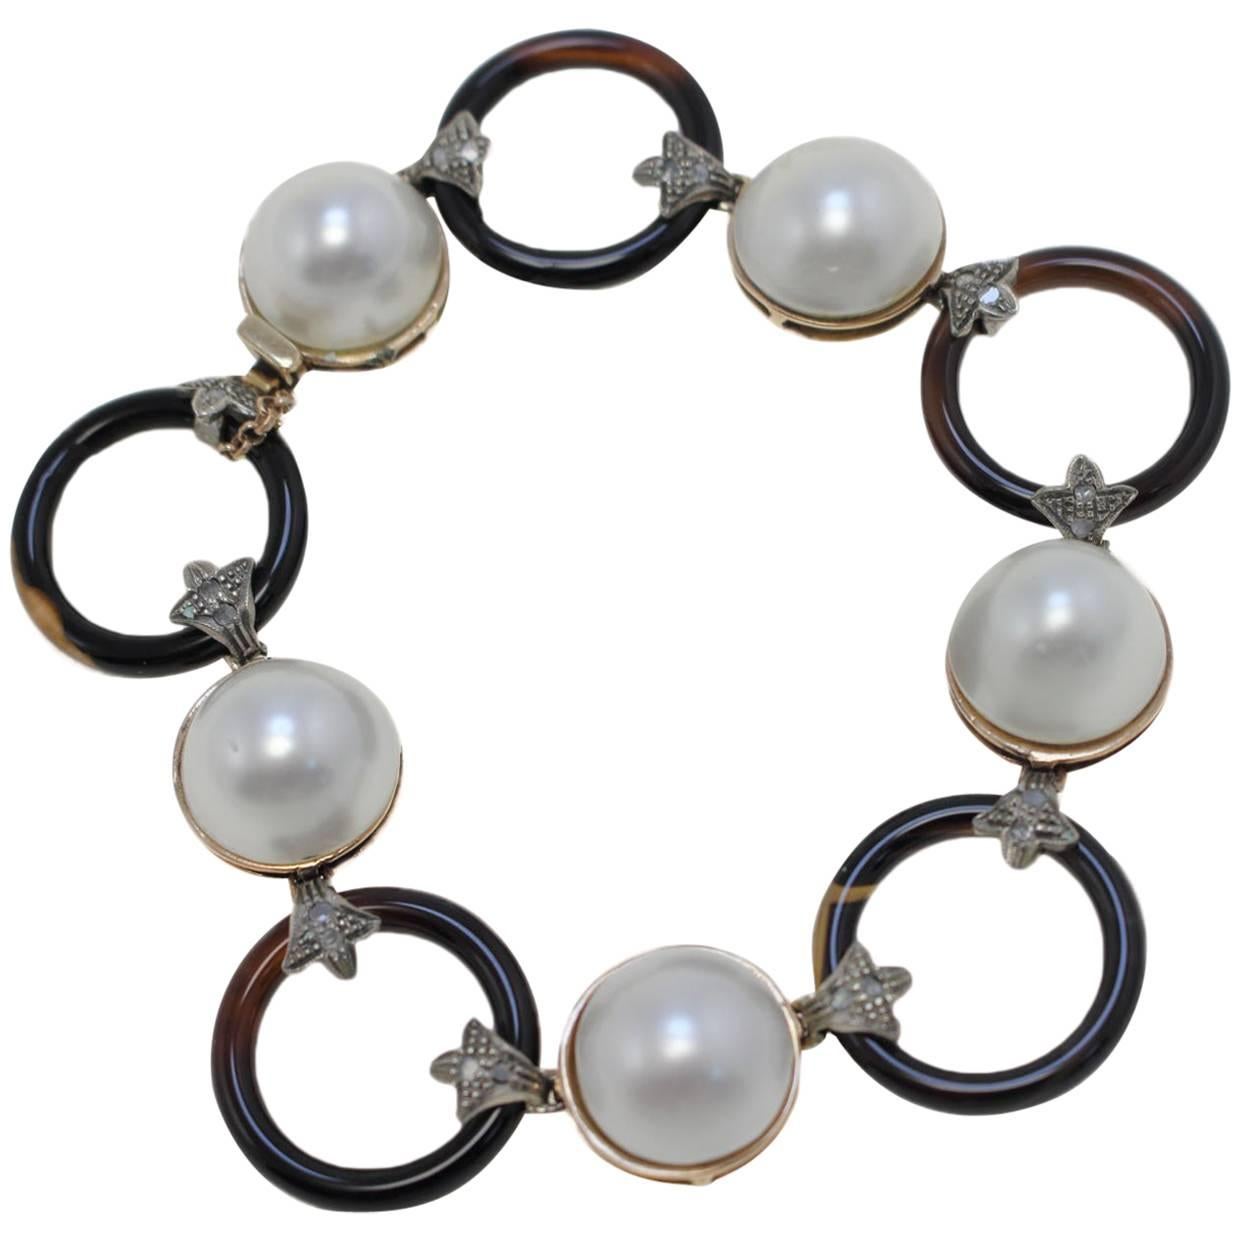  Rose Gold and Silver, Pearls, Diamonds and Onyx Link Bracelet